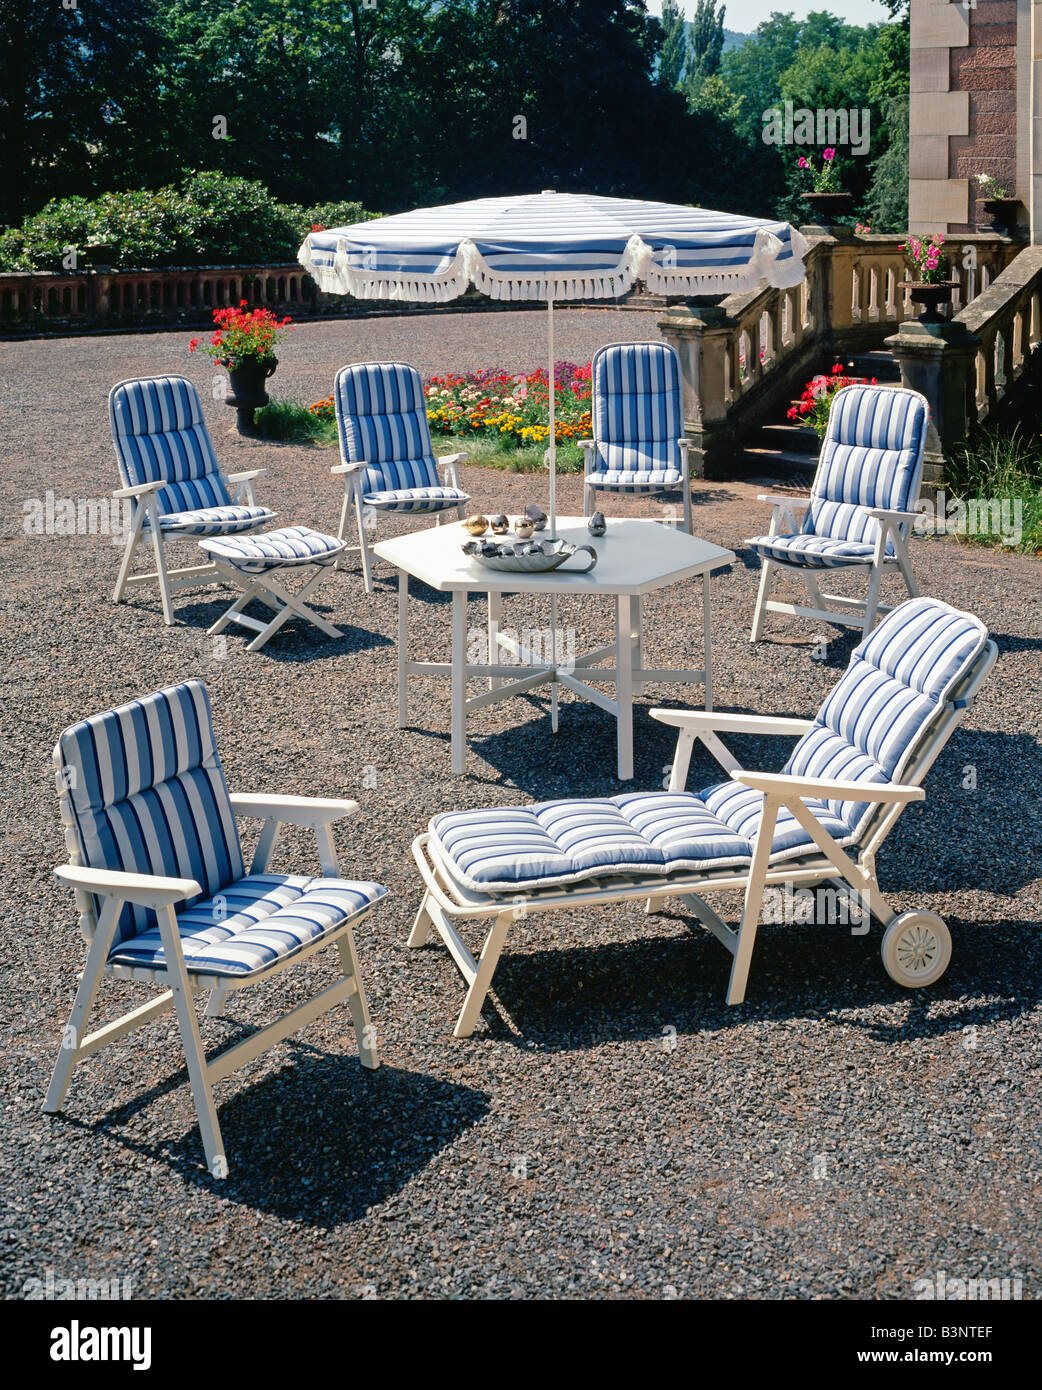 GARDEN FURNITURE CHAIRS ARMCHAIR AND PARASOL DECORATED WITH BLUE STRIPED  FABRIC, TERRACE, GRAVEL, ALSACE, FRANCE, EUROPE Stock Photo - Alamy